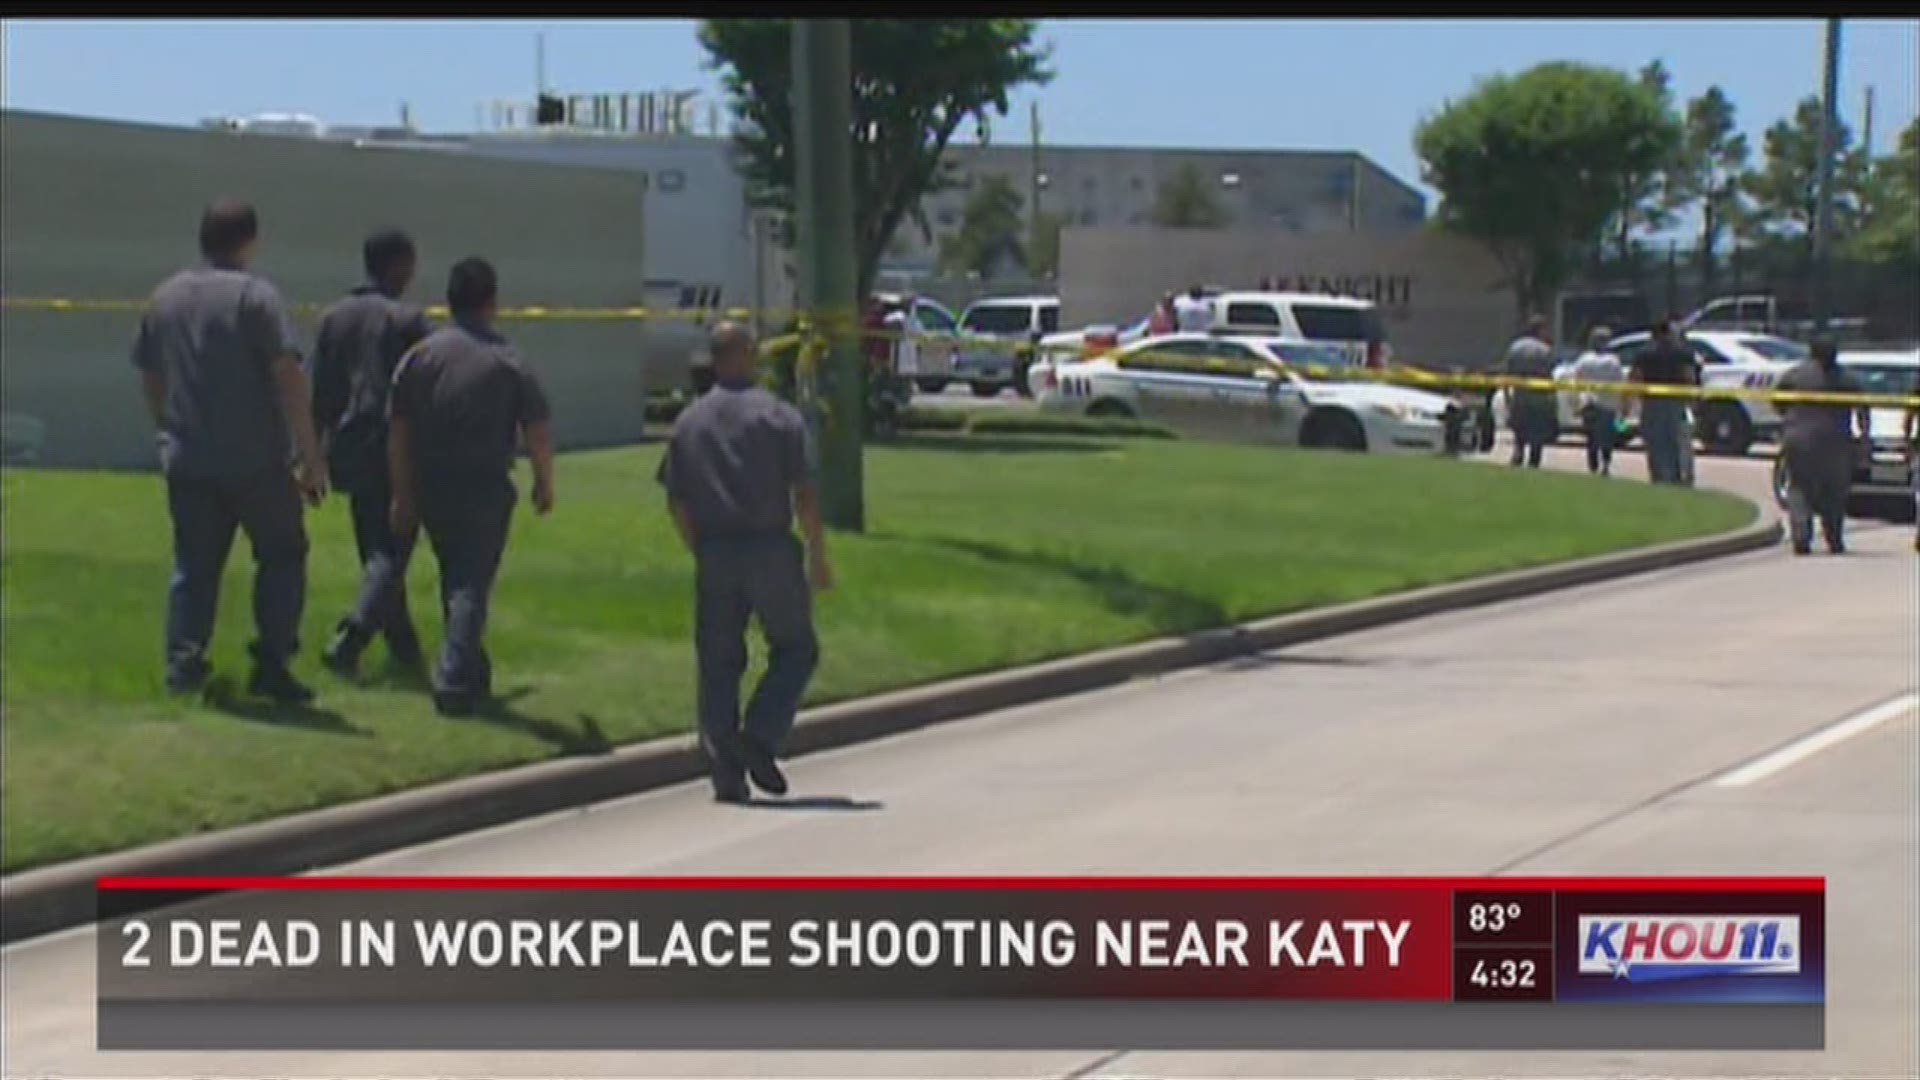 Employees at Knight Transportation are in shock and disbelief over Wednesday mornings shootings.